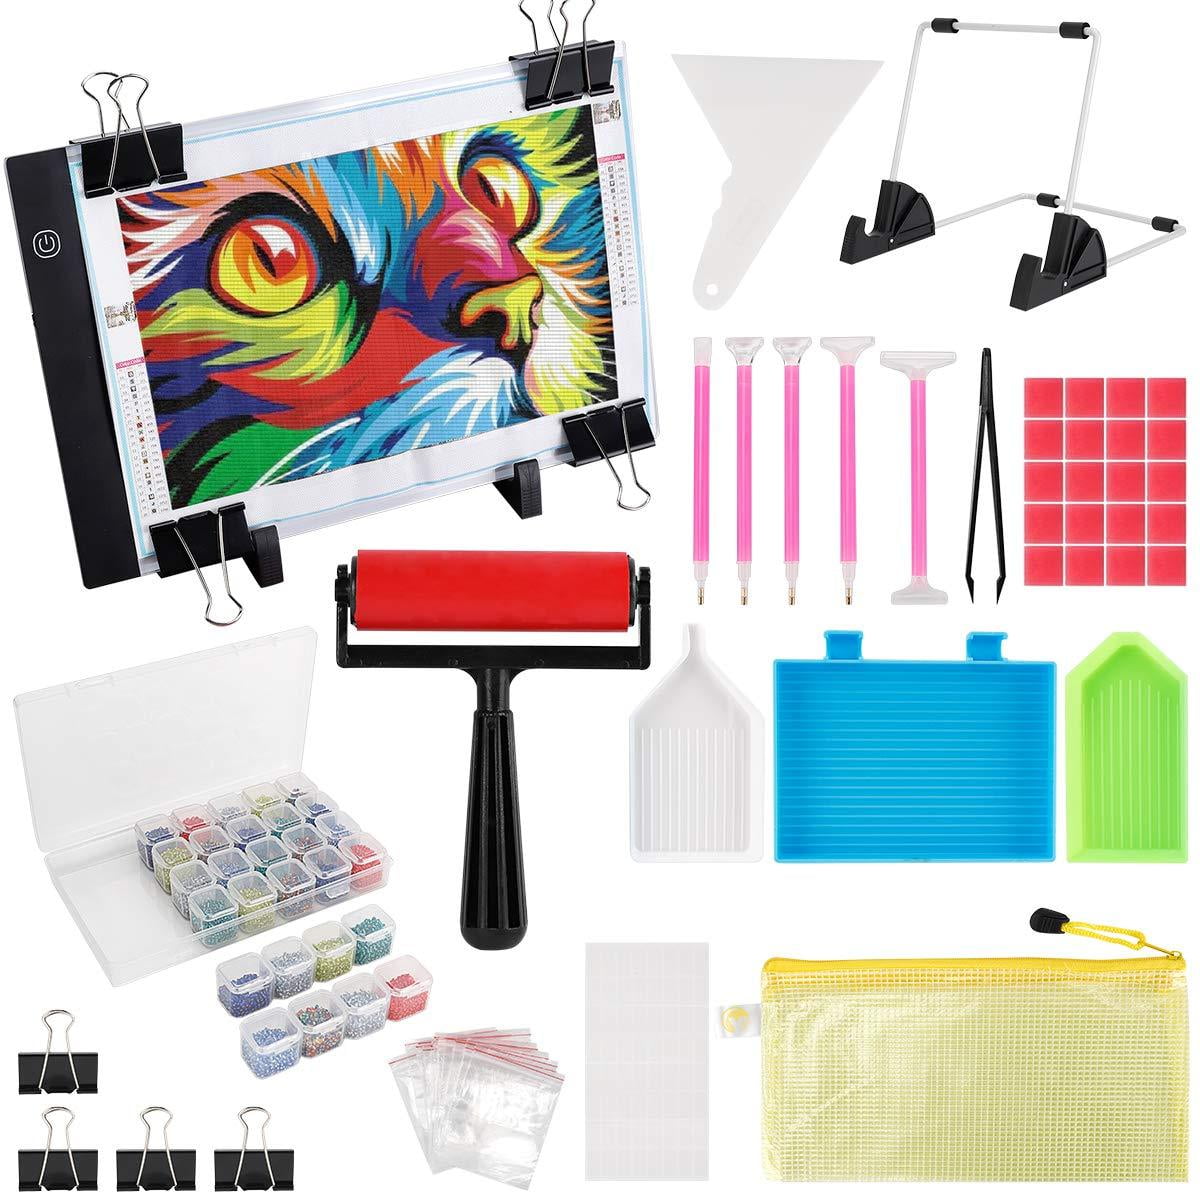 ARTDOT A4 LED Light Board for Diamond Painting Kits, USB Powered Light Pad,  Adjustable Brightness with Detachable Stand and Clips